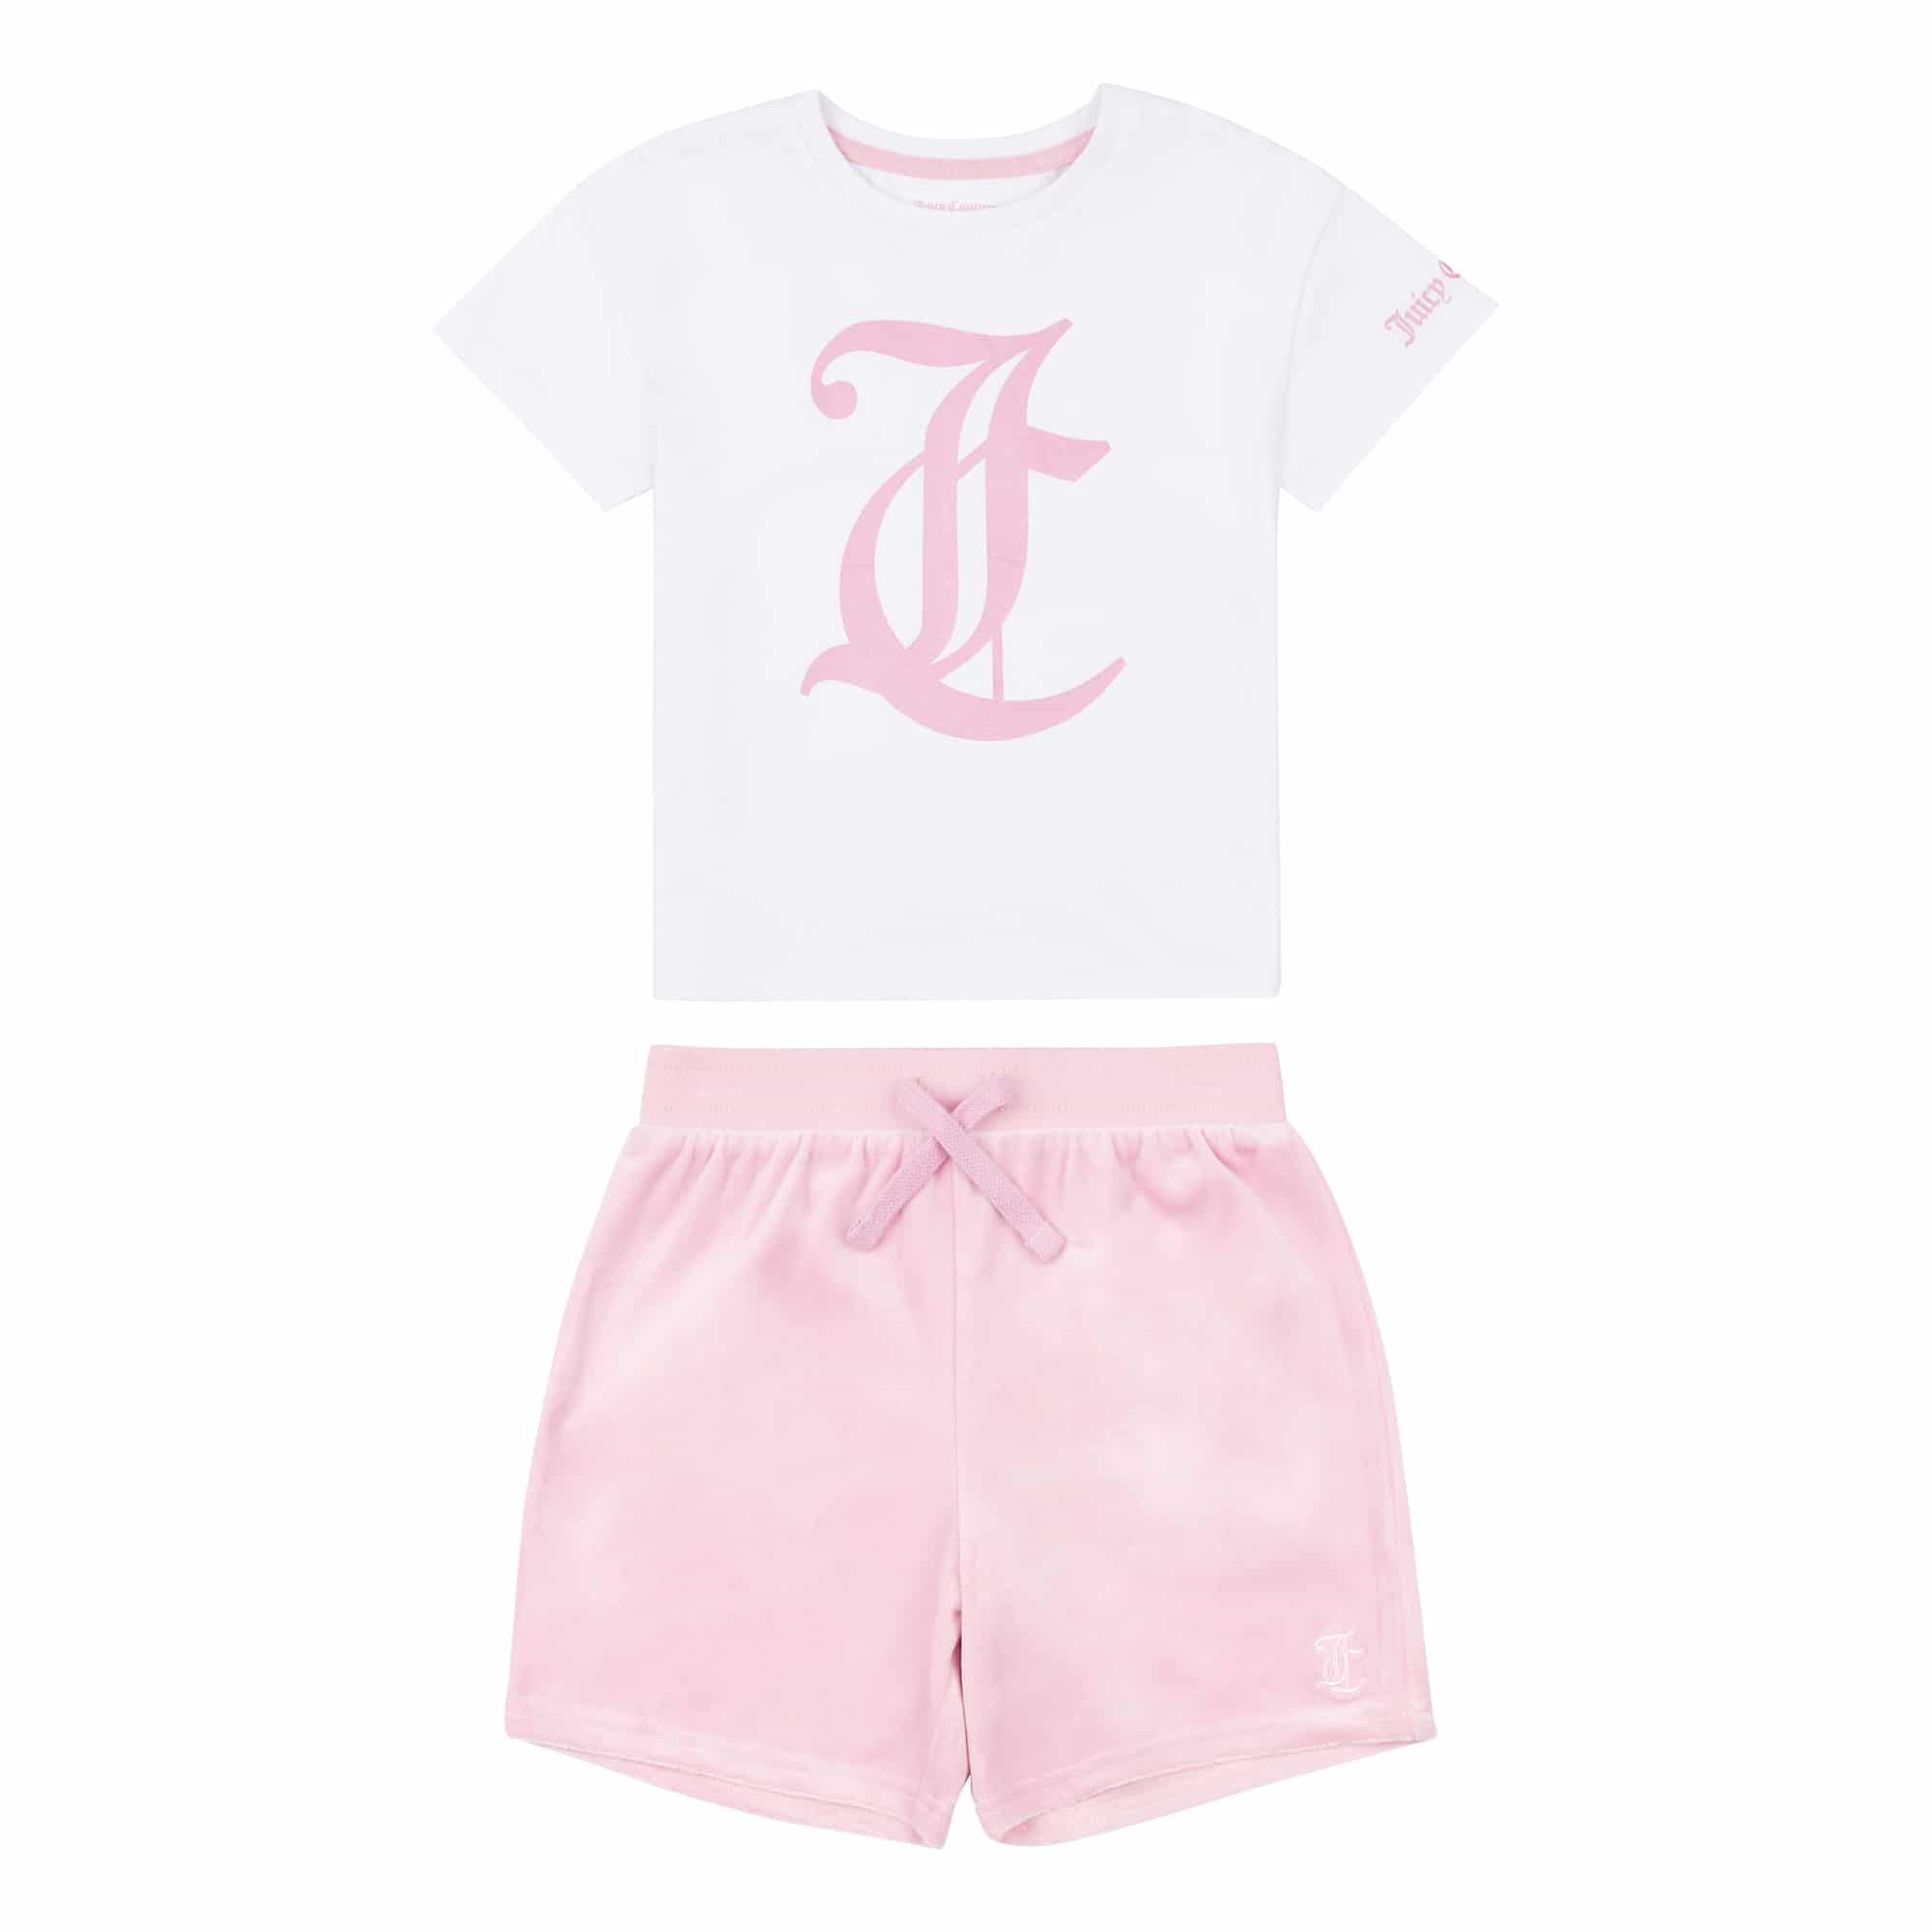 Juicy Couture Outlet UK for Kids - Kids Life Clothing